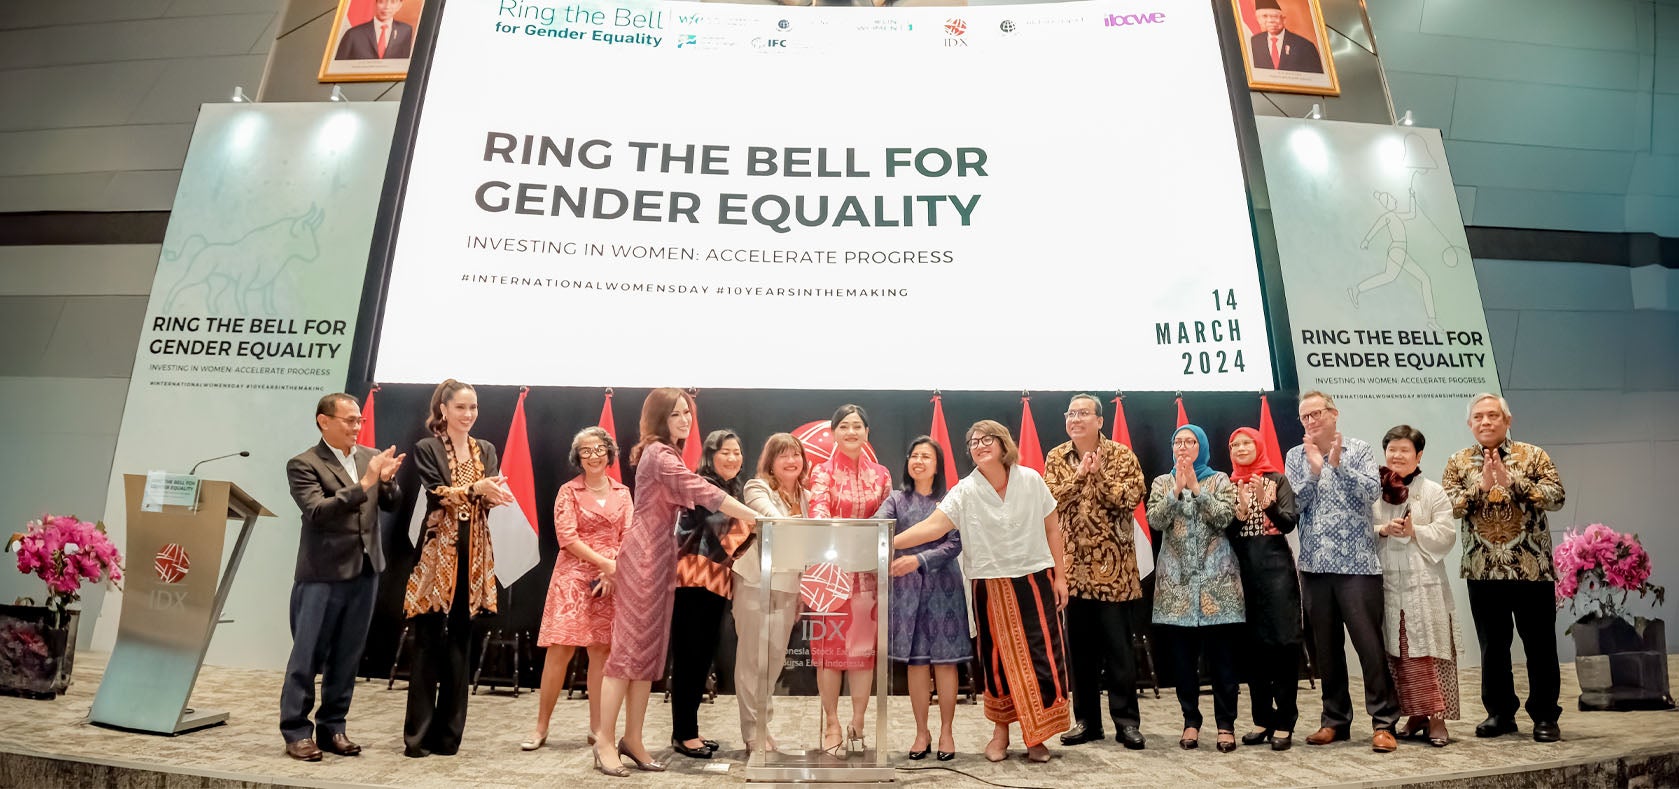 Representatives of Indonesia Stock Exchange, UN Women, International Finance Corporation, Indonesia Global Compact Network and Indonesia Business Coalition for Women’s Empowerment with industry leaders and actress-activist, Cinta Laura, ring the bell for gender equality. Photo: UN Women/Putra Djohan